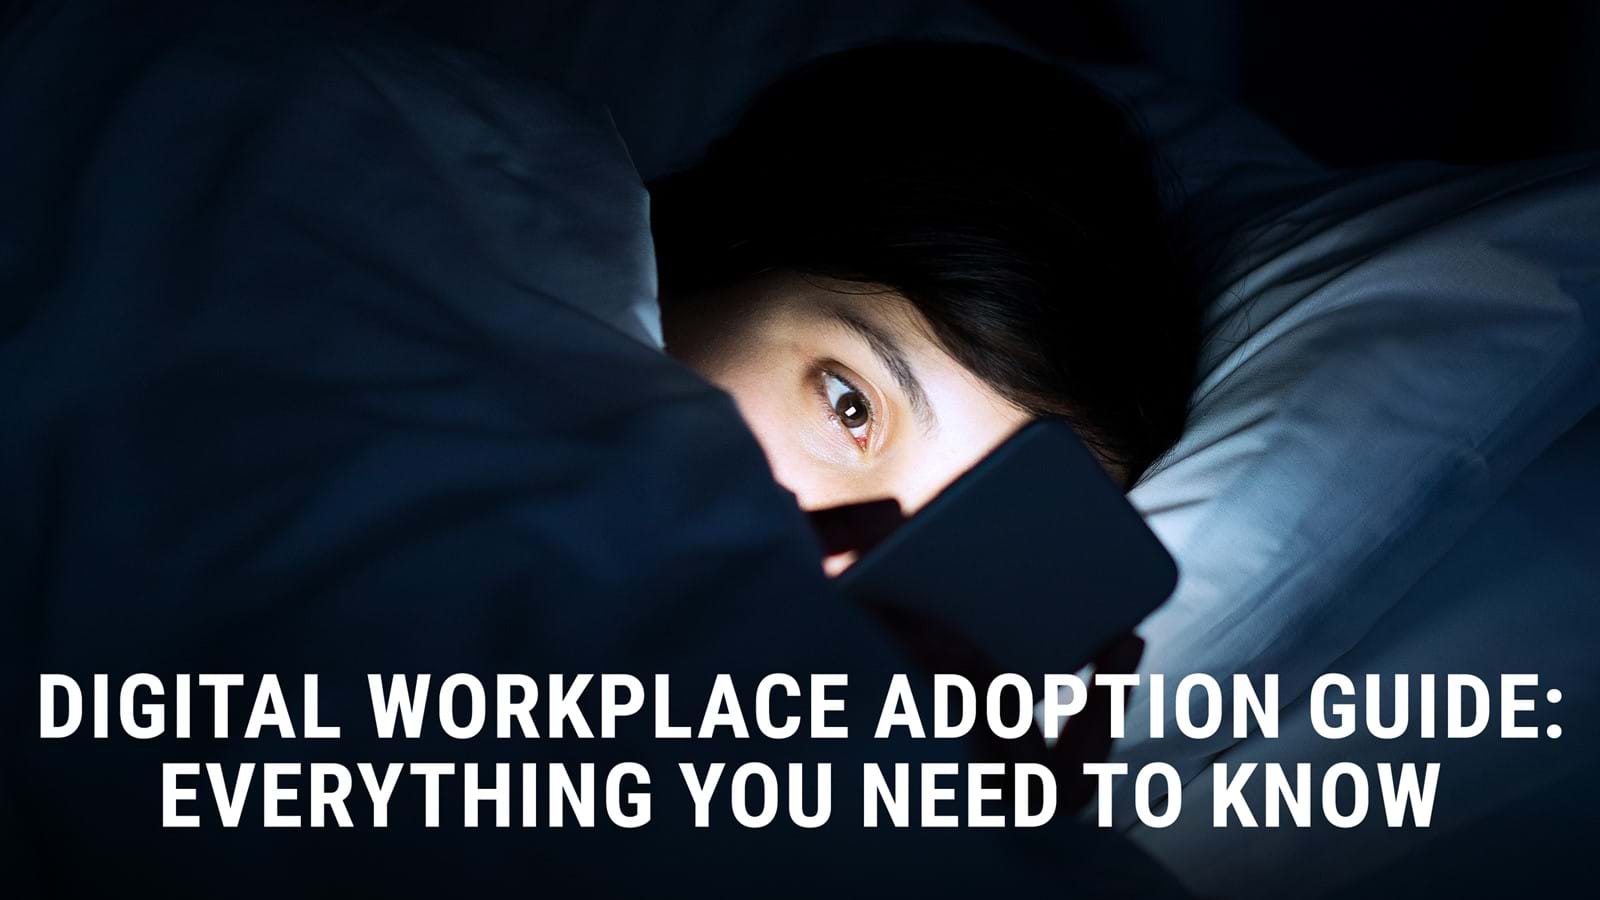 Digital workplace adoption guide cover